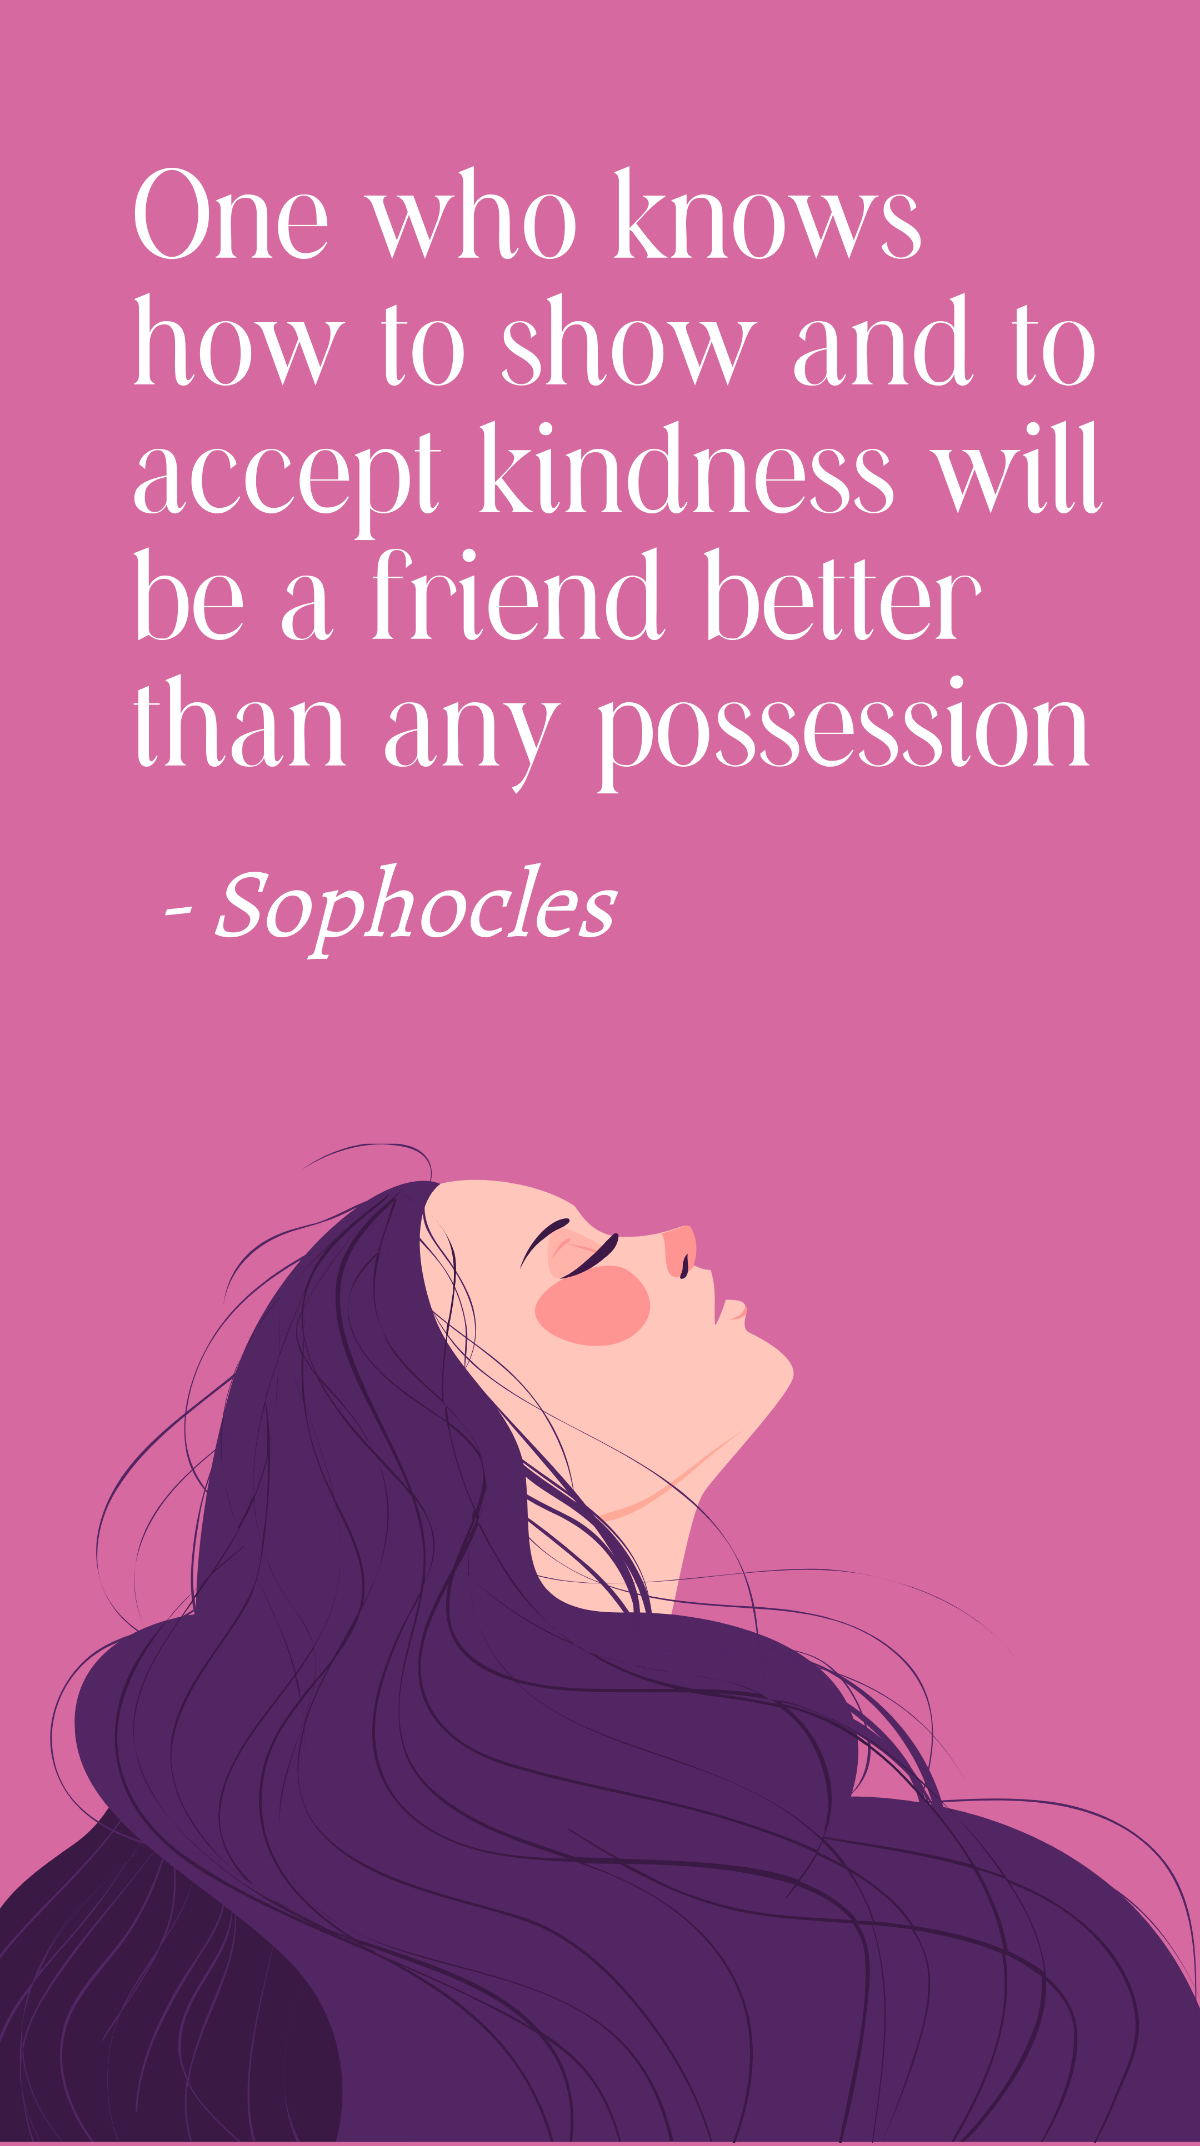 Free Sophocles - One who knows how to show and to accept kindness will be a friend better than any possession Template